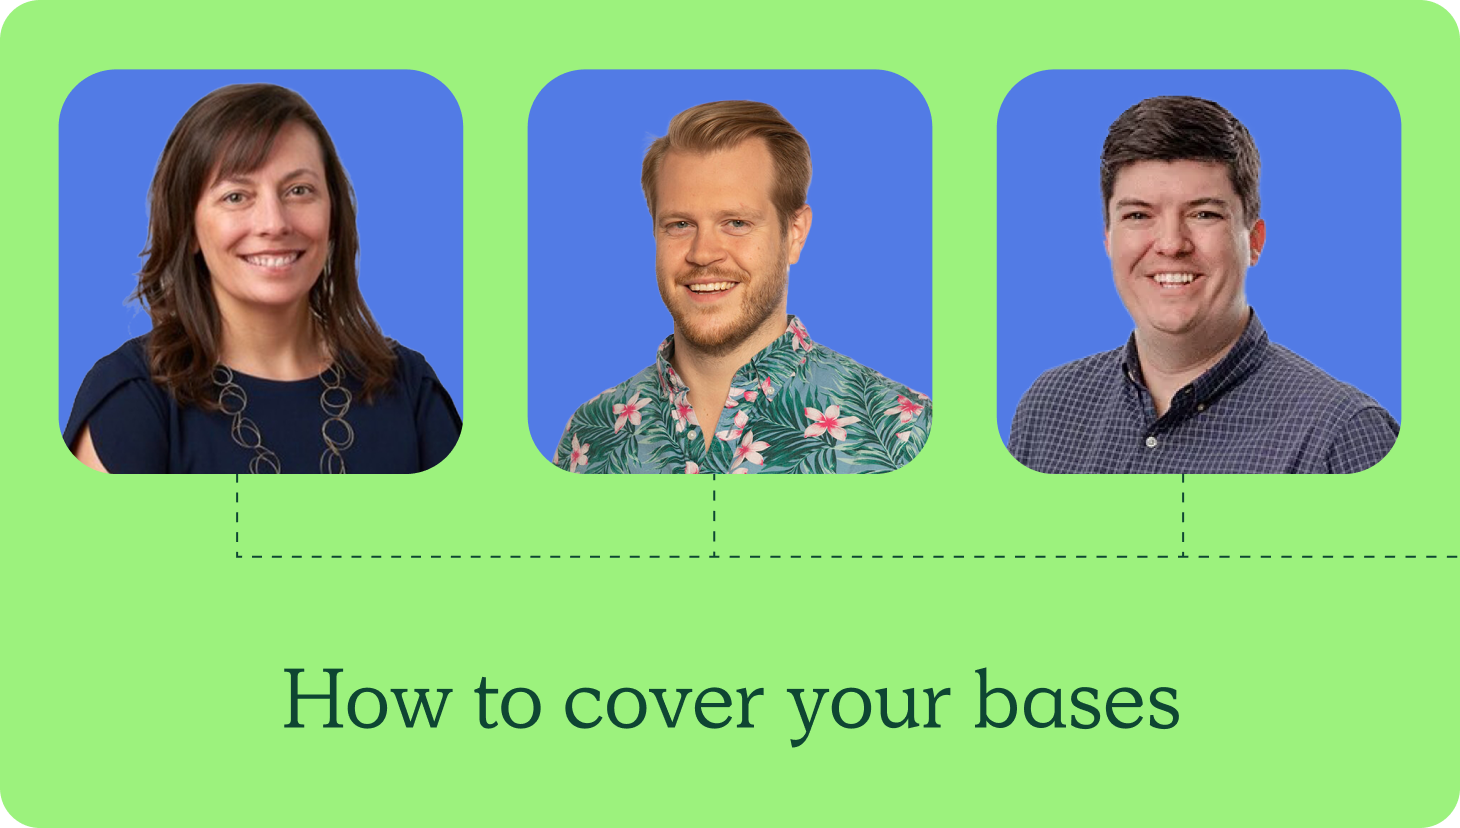 Sara Strope, Graham Collins and Ryan Milligan for "how to cover your bases" blog